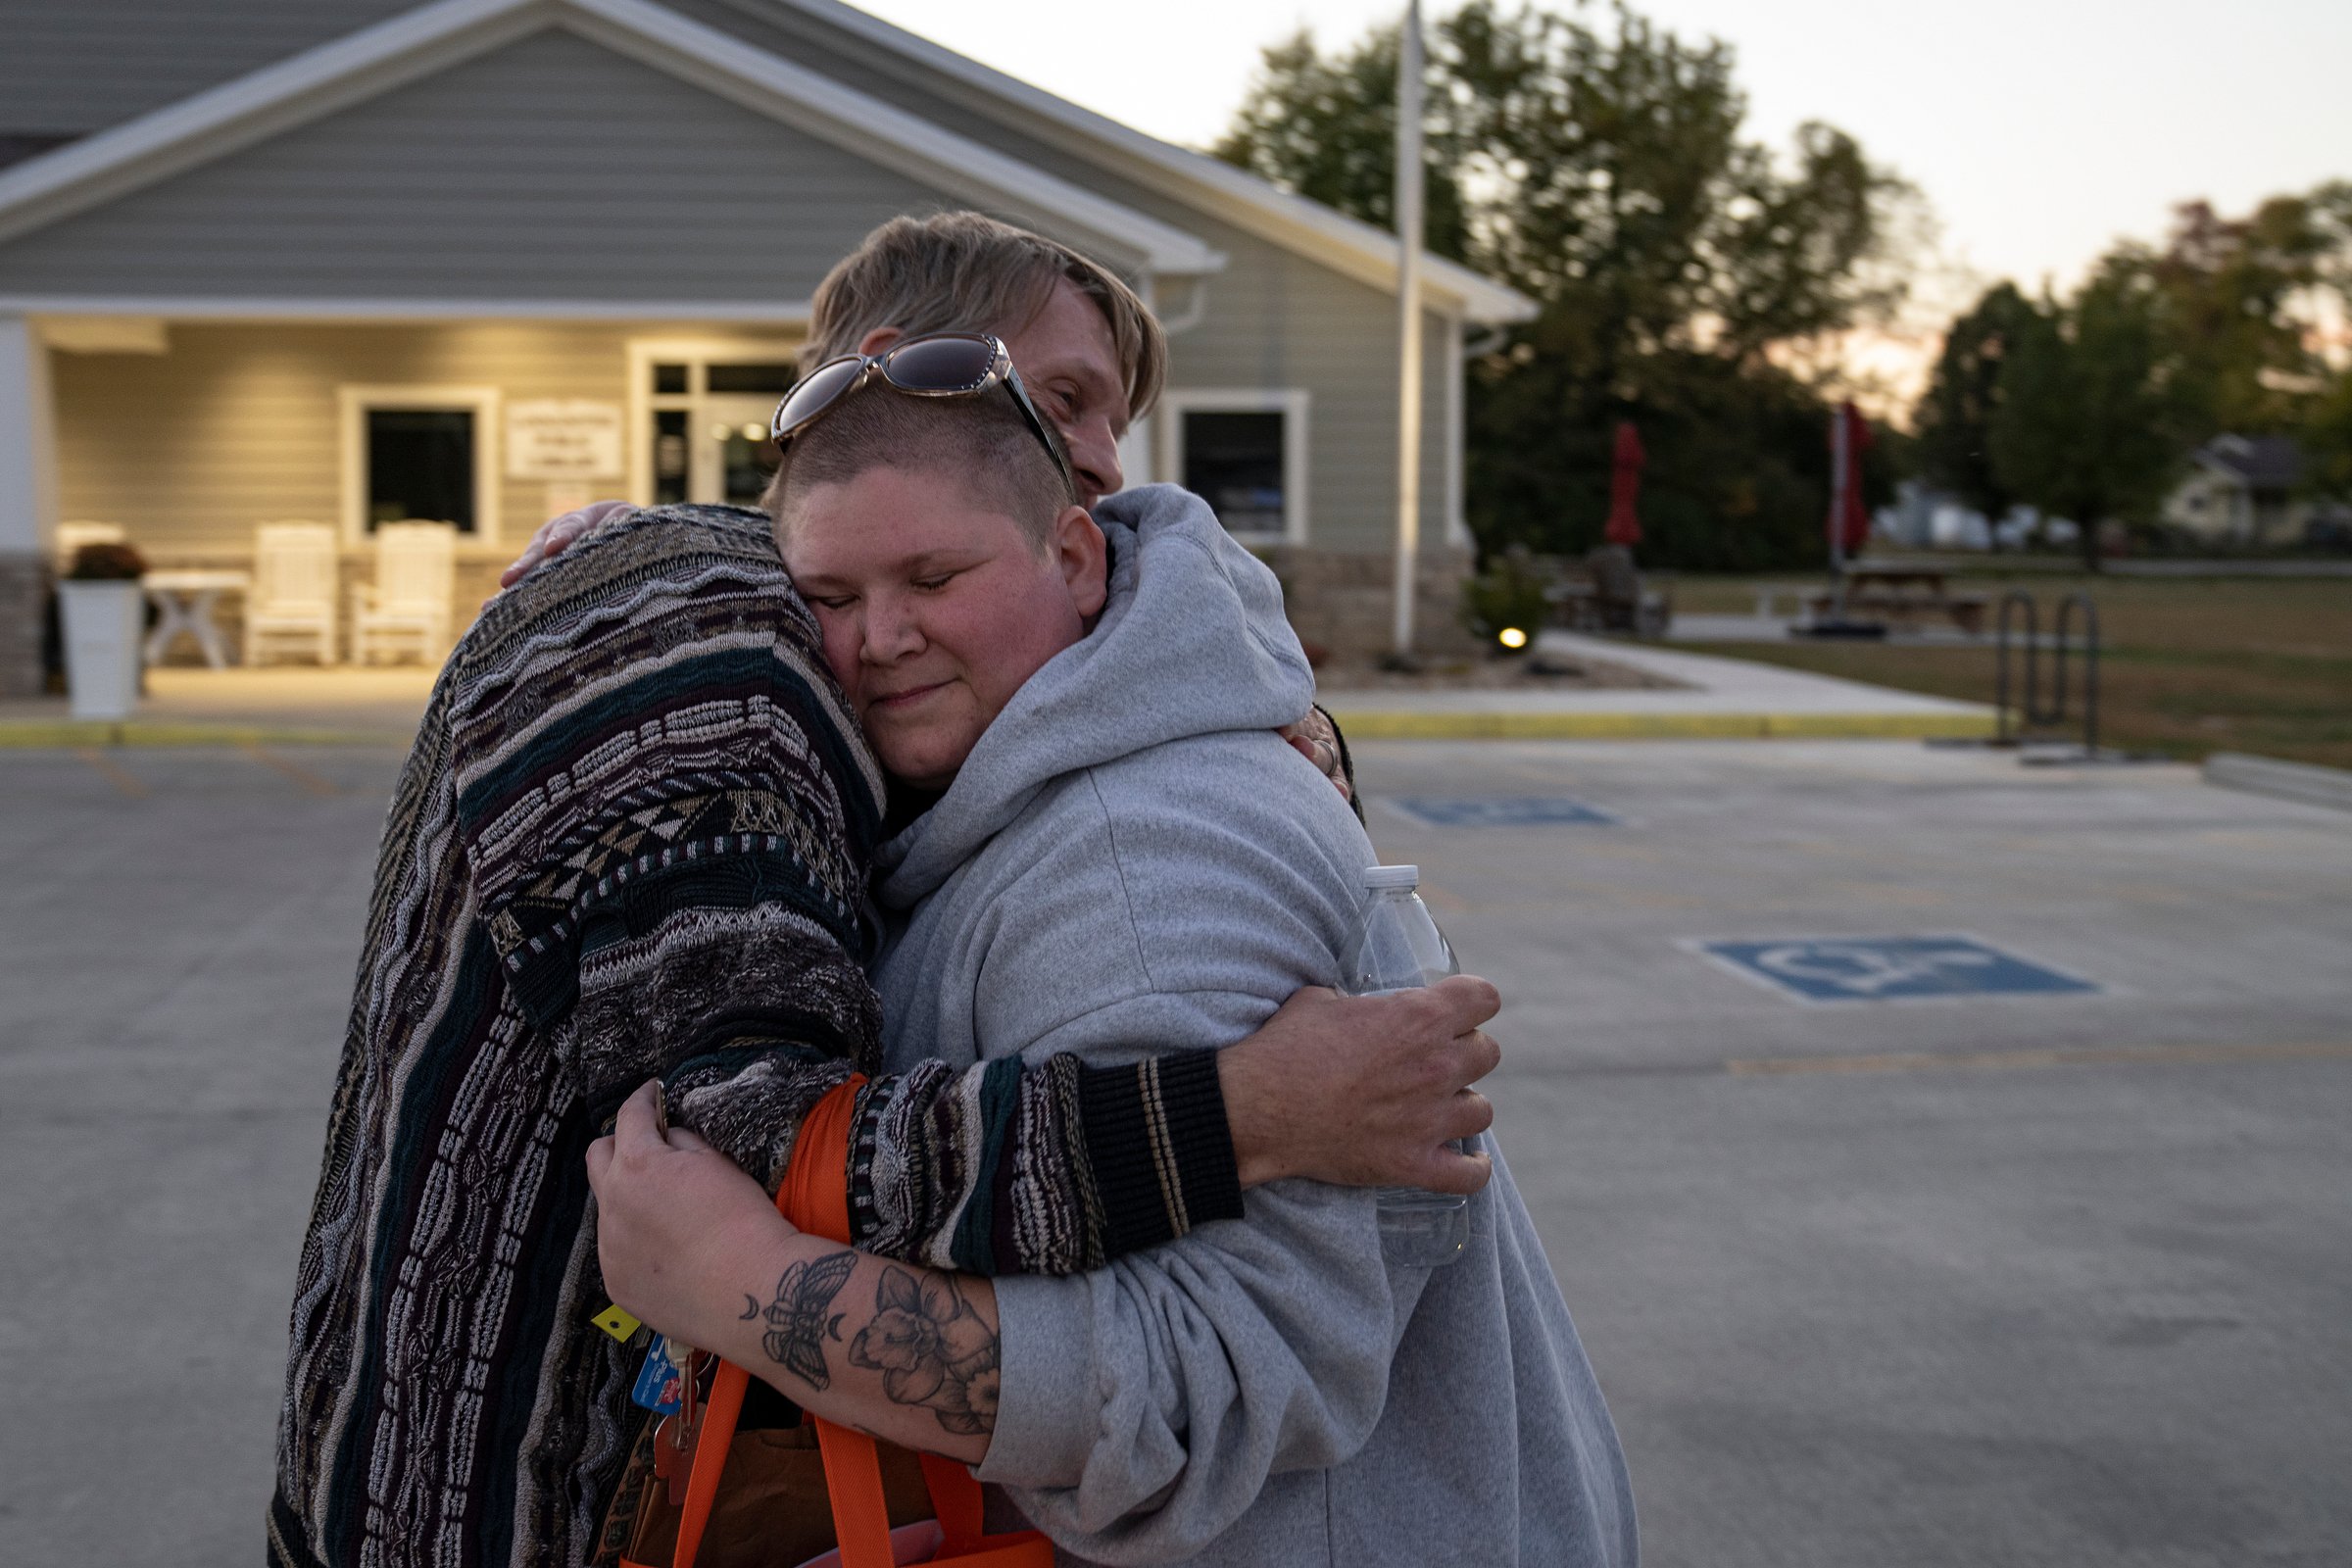  Kayla Whaley hugs Tracy Brown-Salsman after a Loogootee Pride meeting at the town's library on Thursday, Oct. 20, 2022. Whaley moved back to her hometown of Loogootee in 2016 but didn't become friends with Tim and Tracy until 2019. "I really didn't 